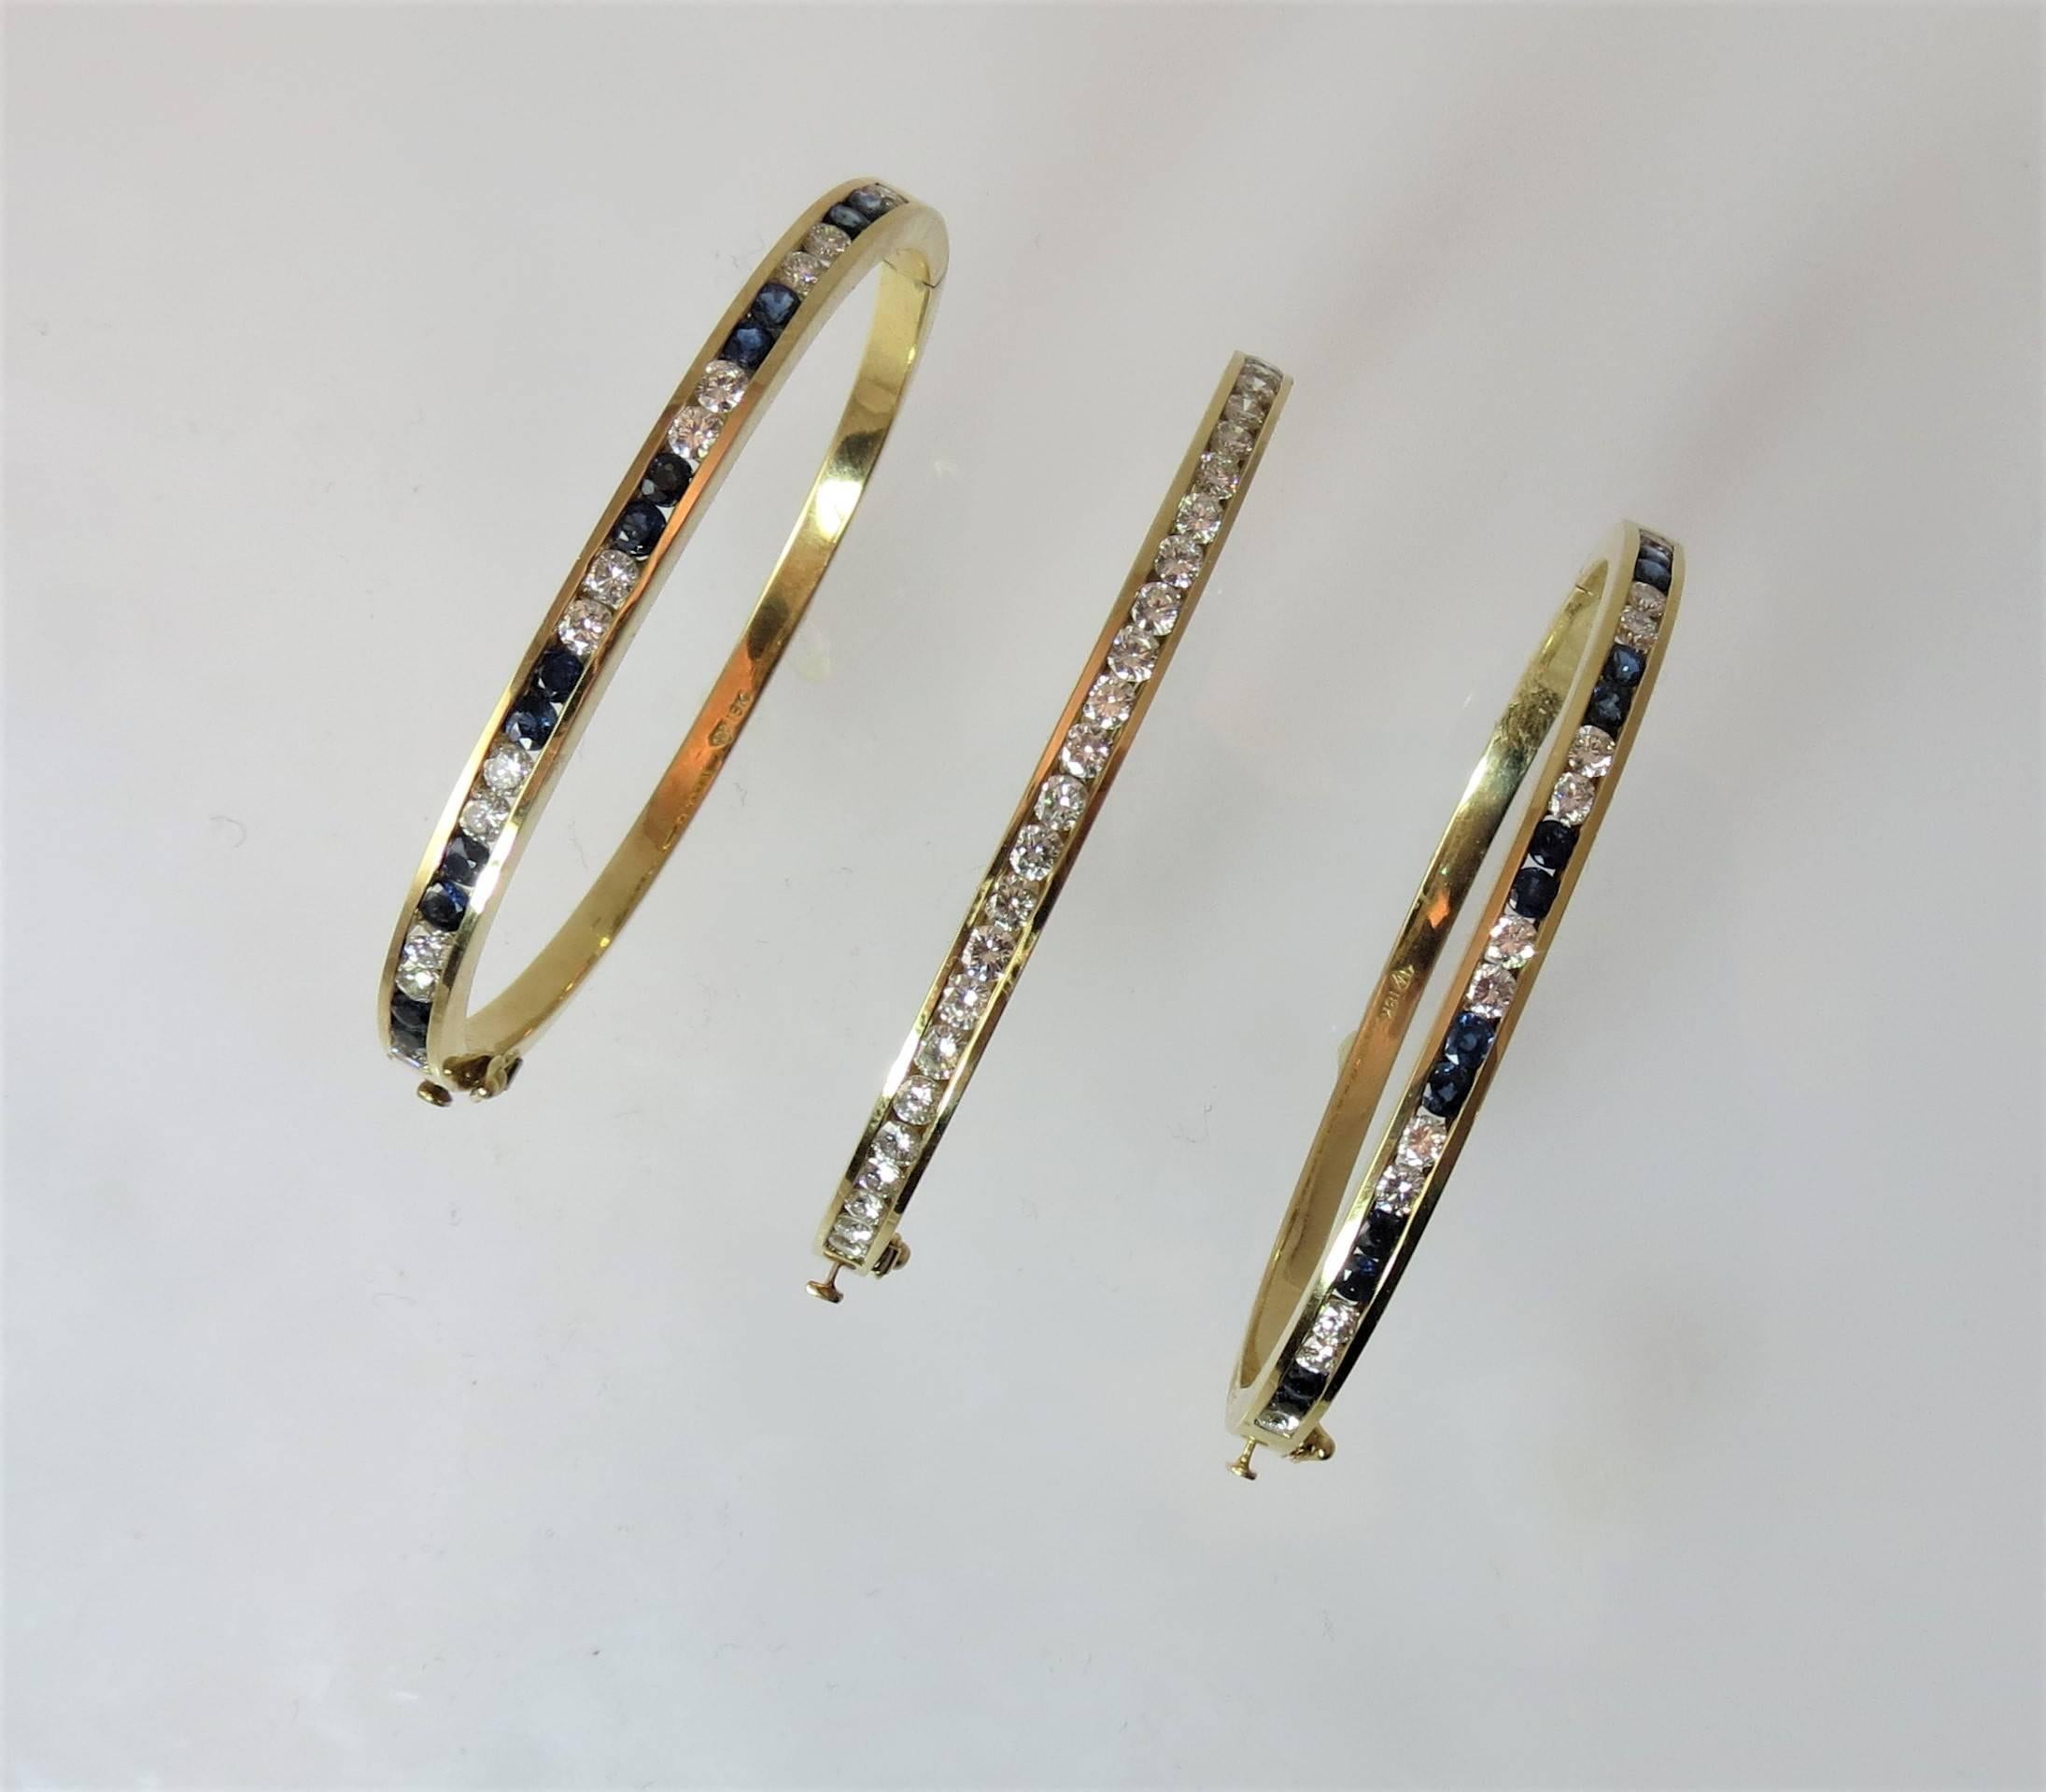 Set of three 18K yellow gold  hinged bangle bracelets:

Two 18K yellow gold hinged bangle bracelets, each set with 12 round blue sapphires weighing 1.54 cts and 12 full cut round diamonds weighing 1.20cts total, width 1/8 inch. Priced at $3500